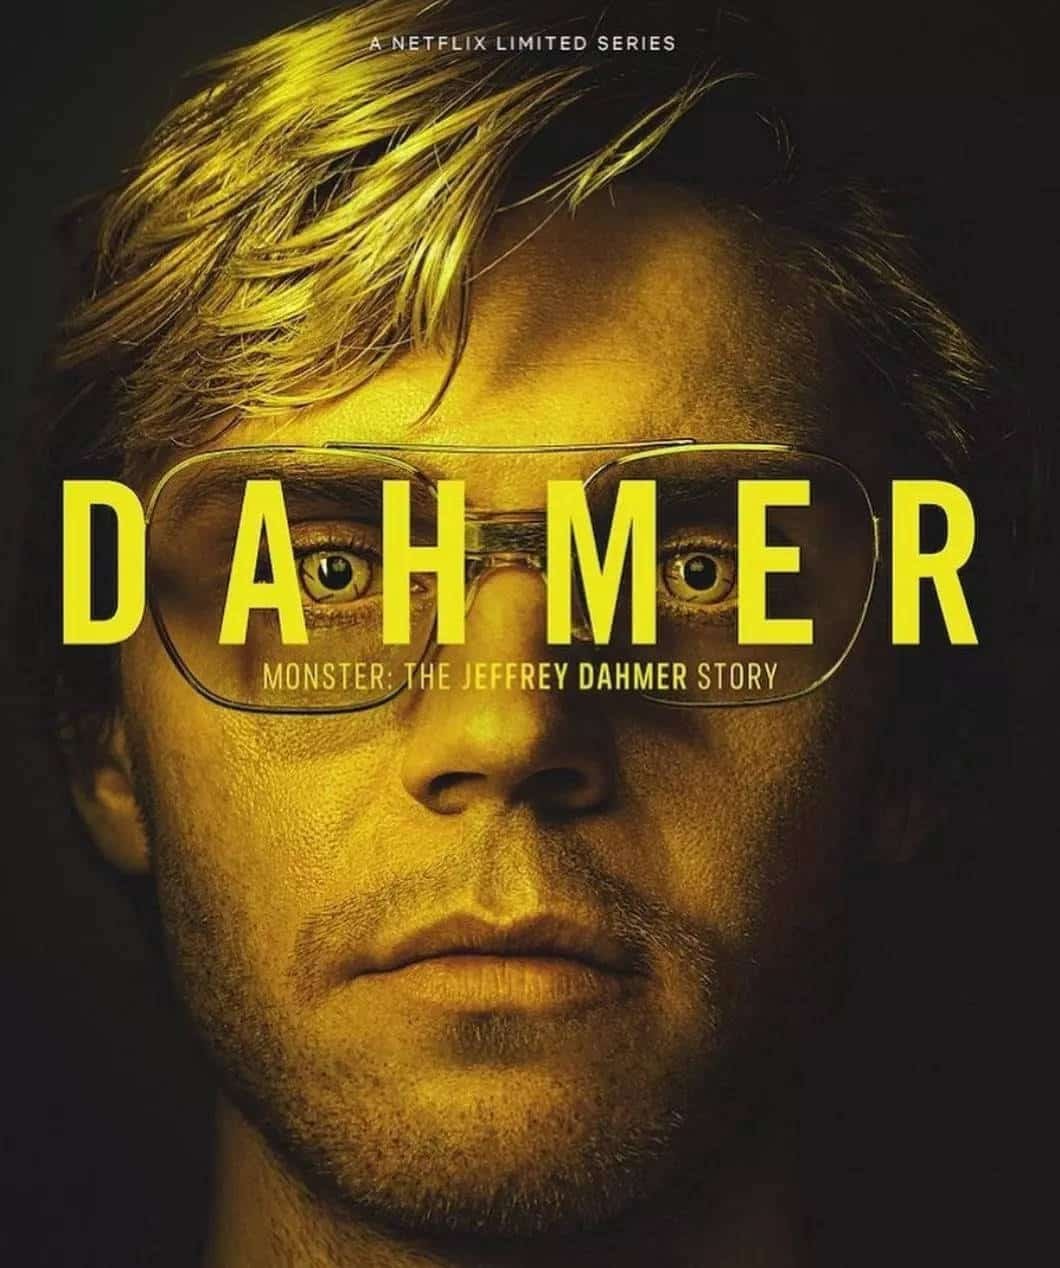 Is Dahmer Based on a true story?